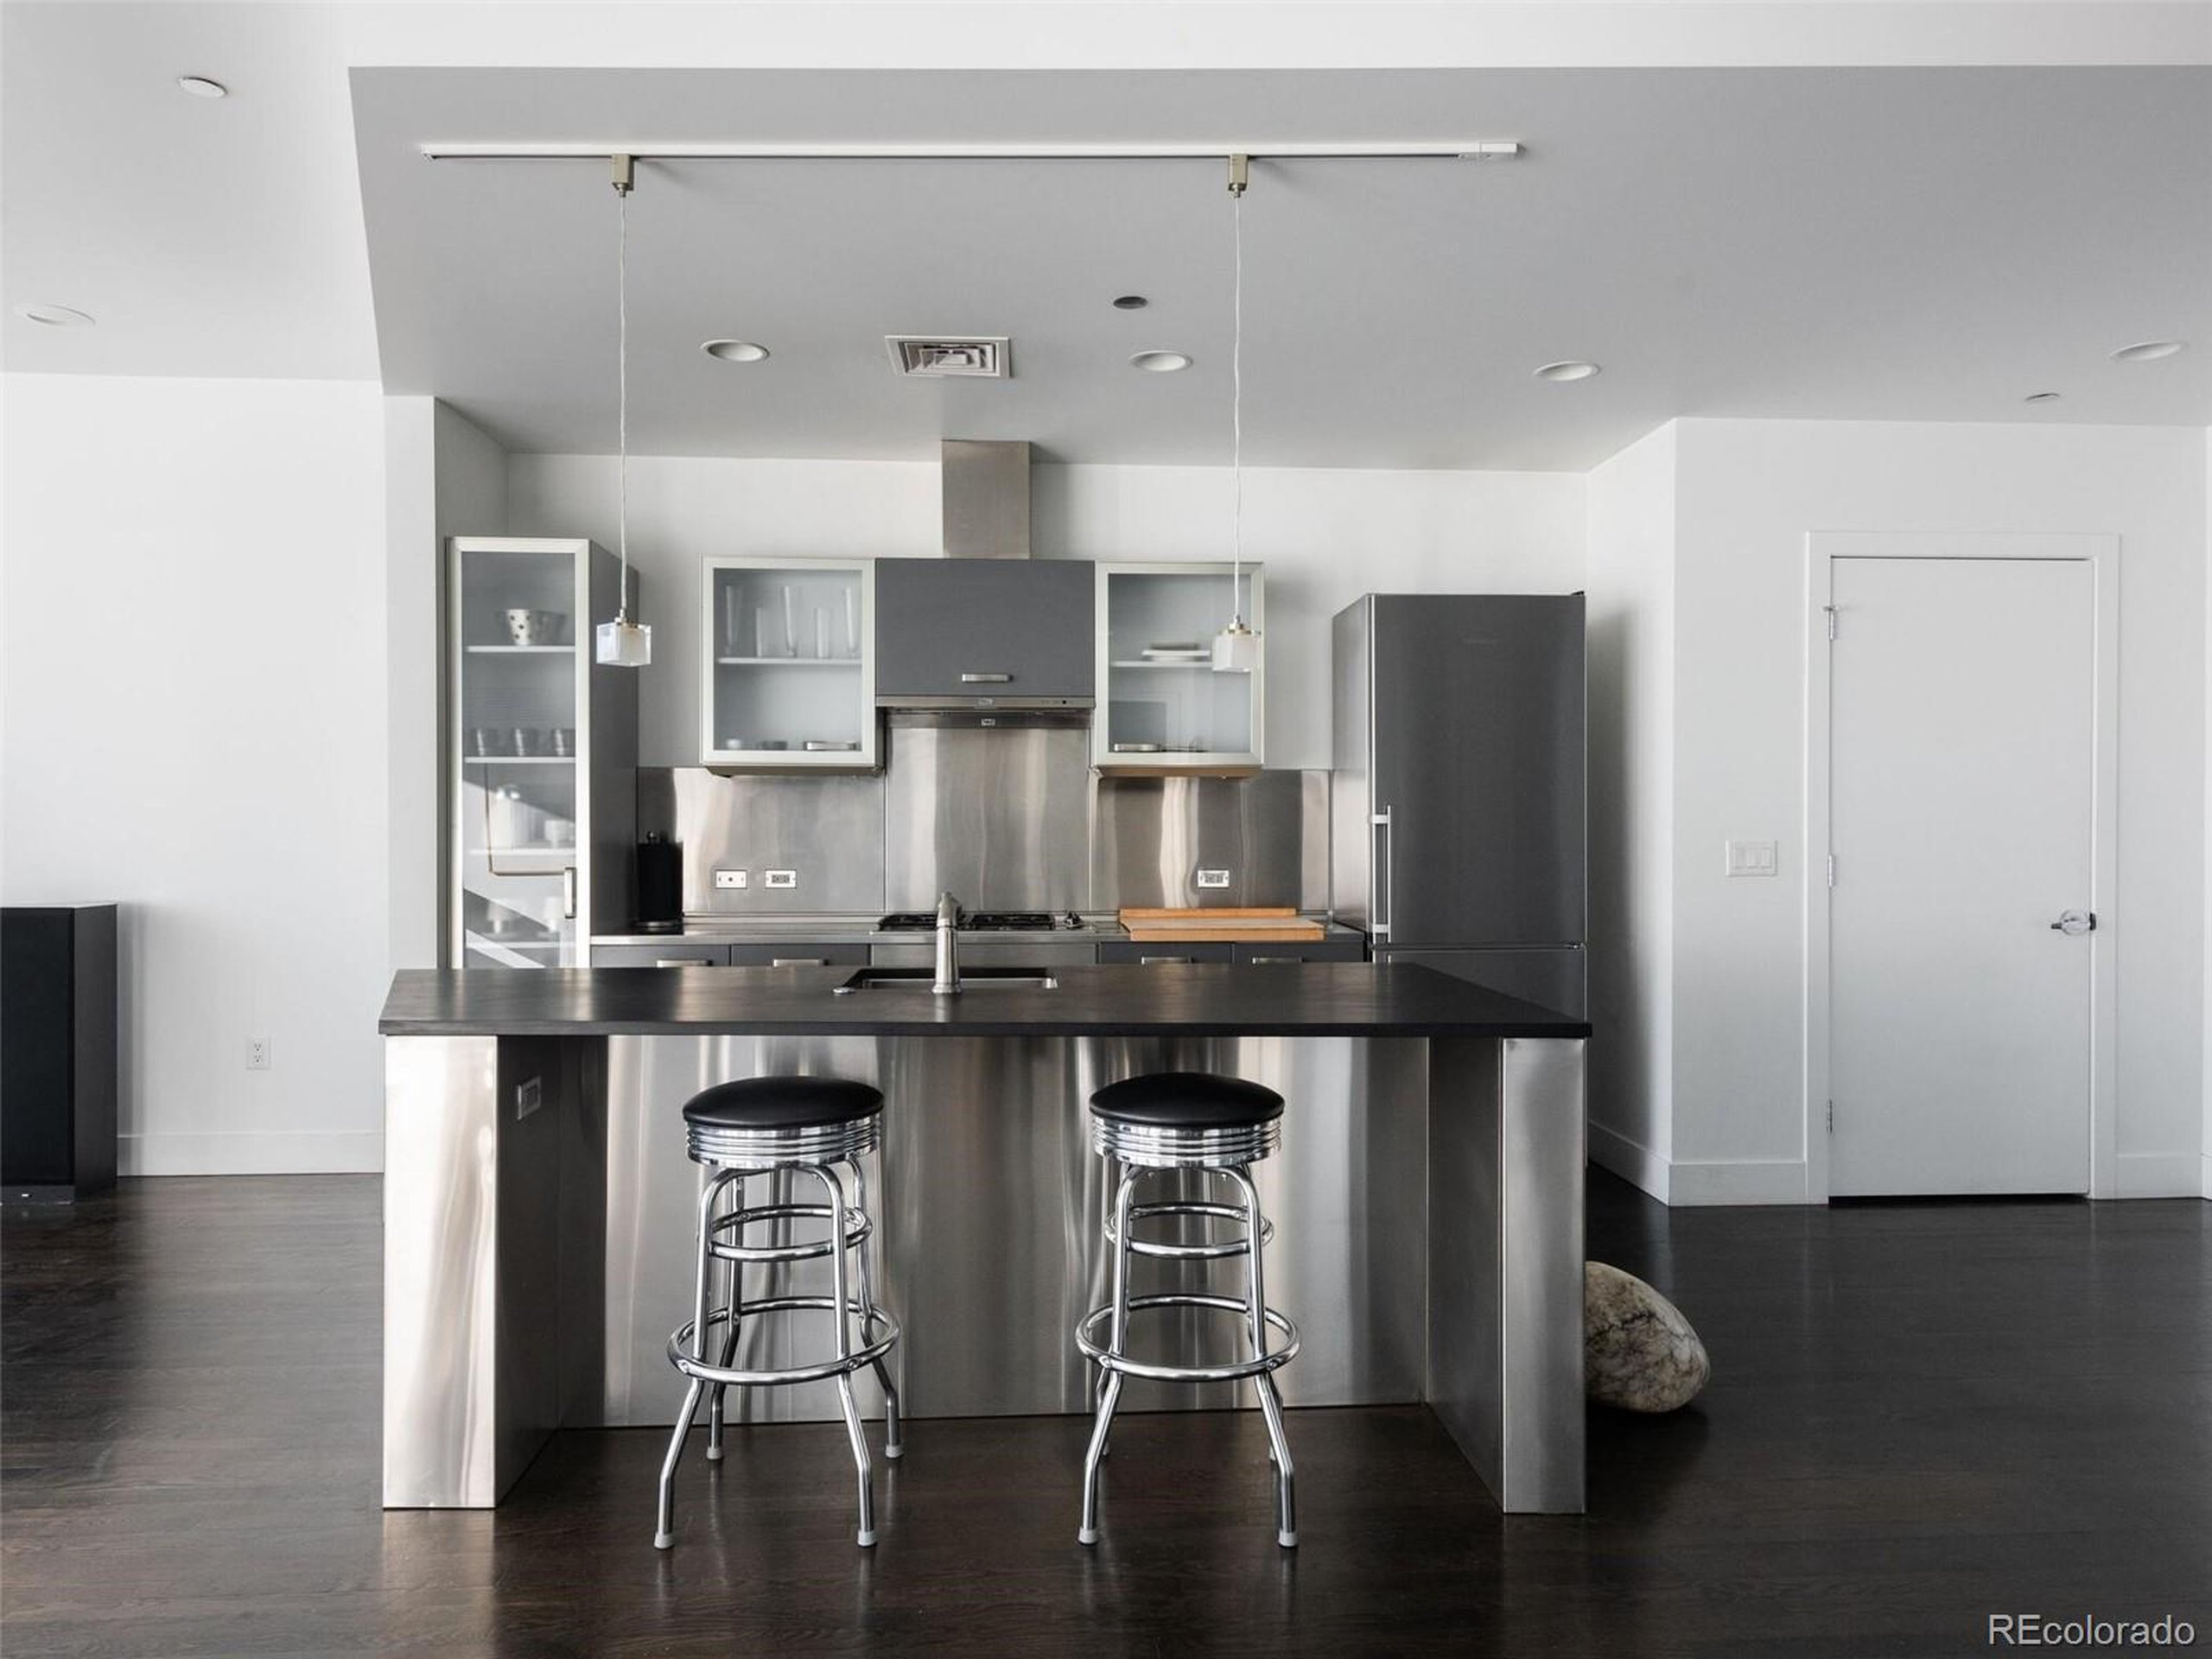 a kitchen with stainless steel appliances a dining table chairs refrigerator and sink